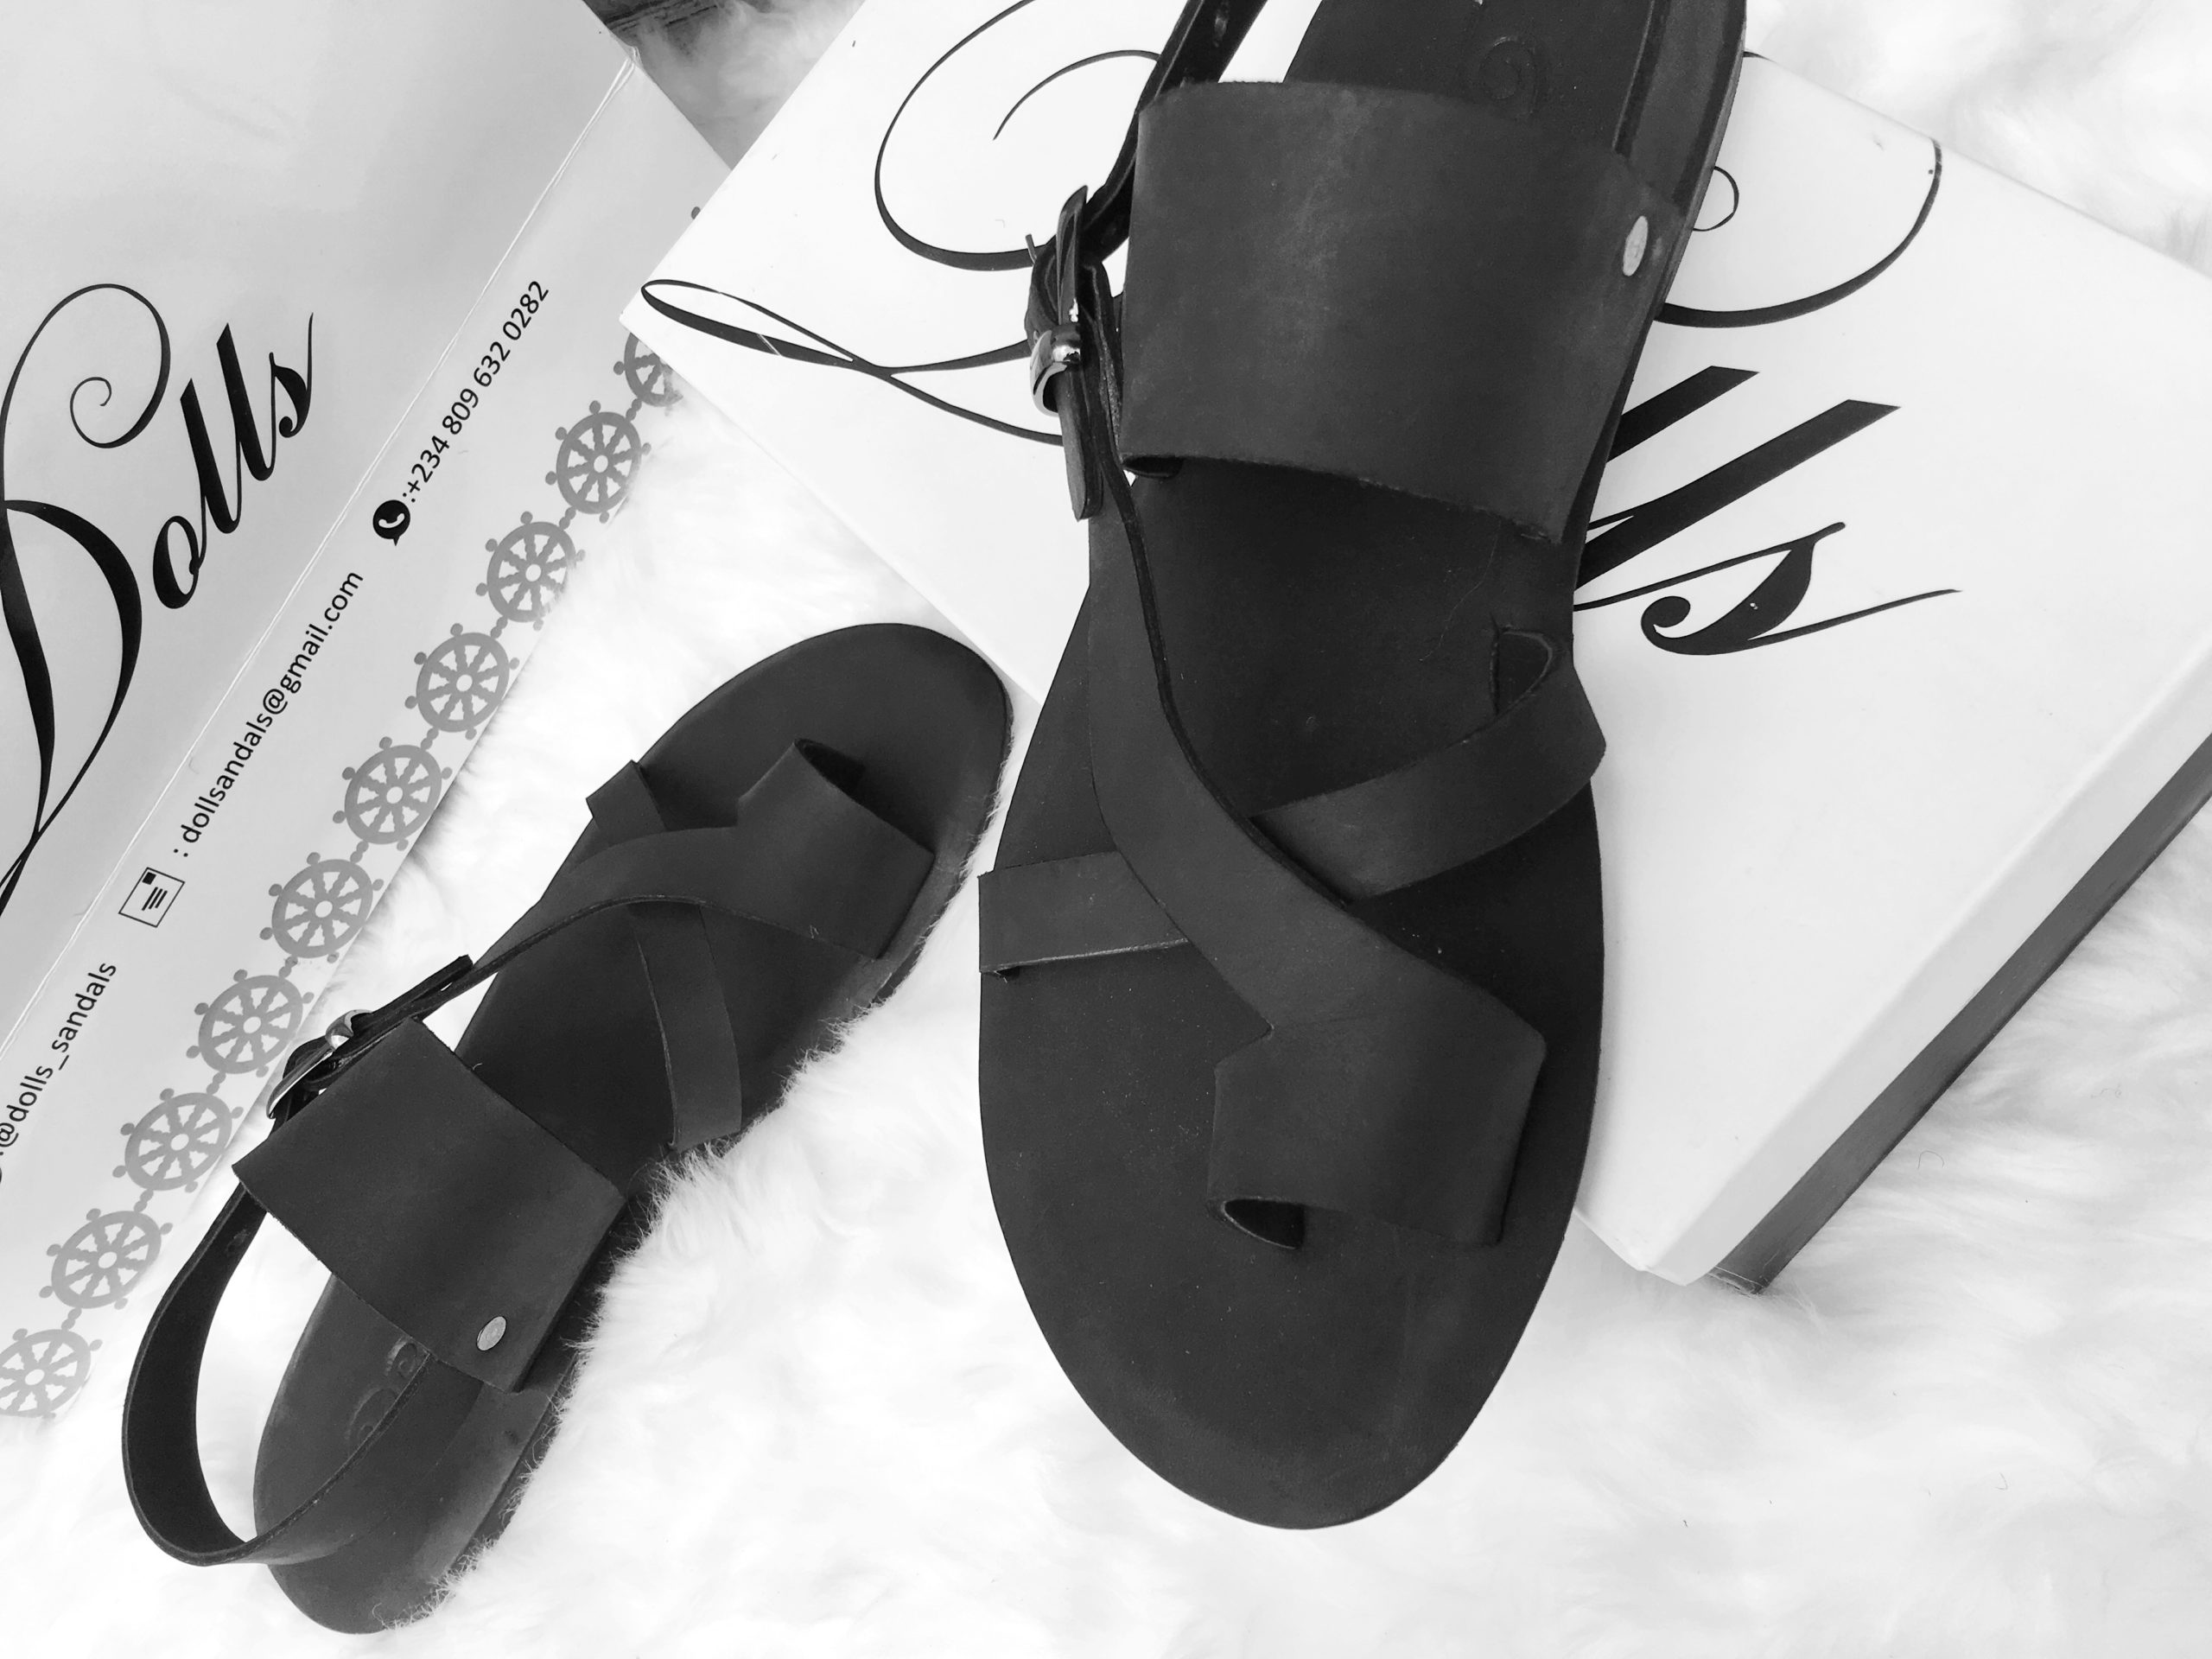 picture of a toe hold sandal for men by Dolls leather products